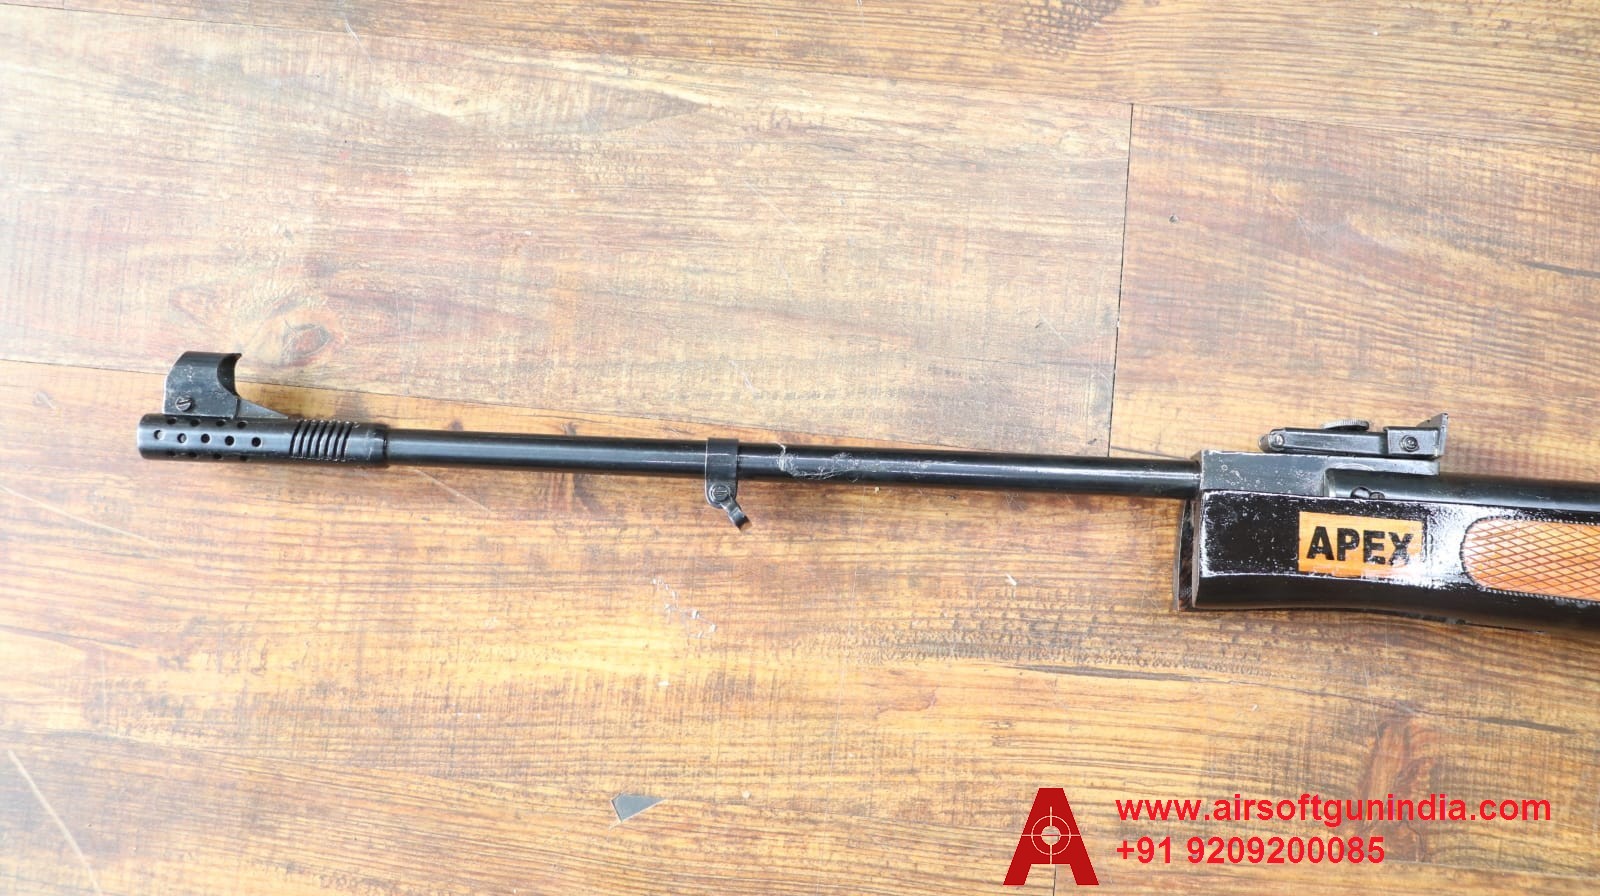 APEX .177 INDIAN AIR RIFLE BY AIRSOFT GUN INDIA BLACK WITH WOODEN TEXTURE